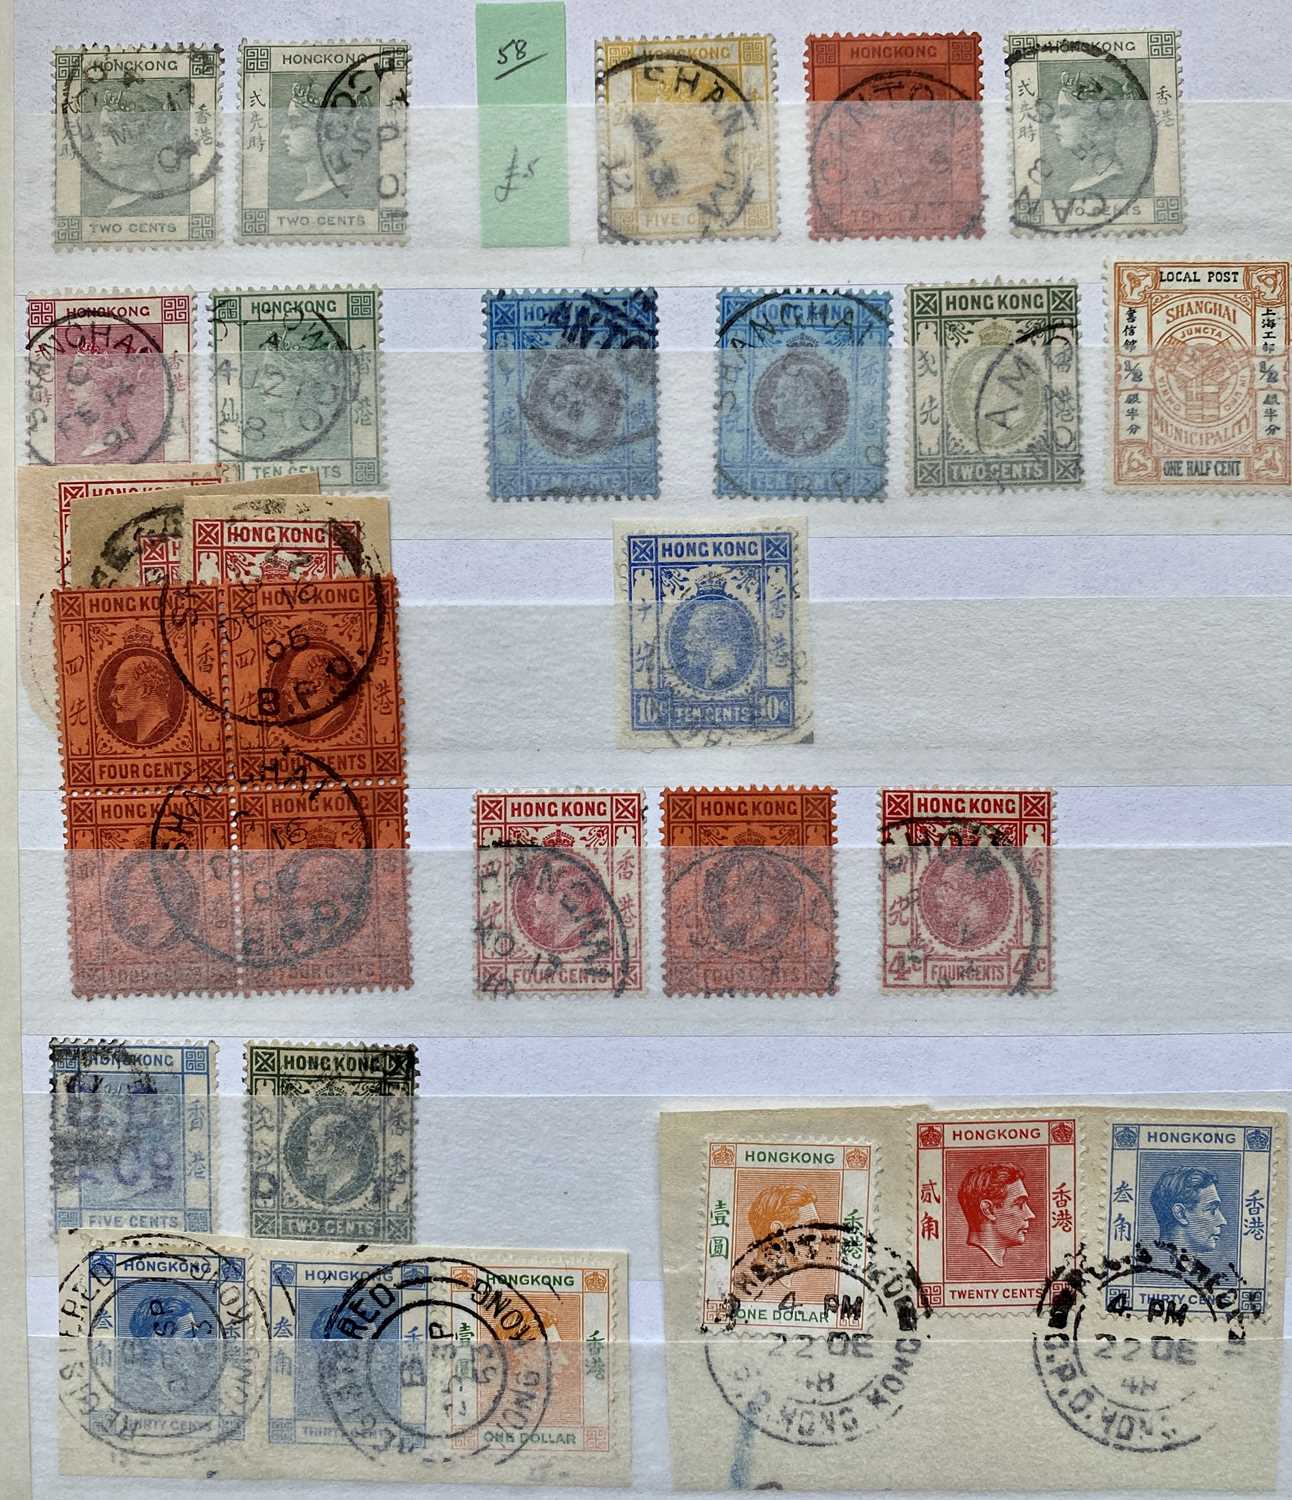 VERY GOOD HONG KONG UNMOUNTED MINT & FINE USED HIGH CAT VALUE, OVERPRINTS ETC - Image 6 of 19